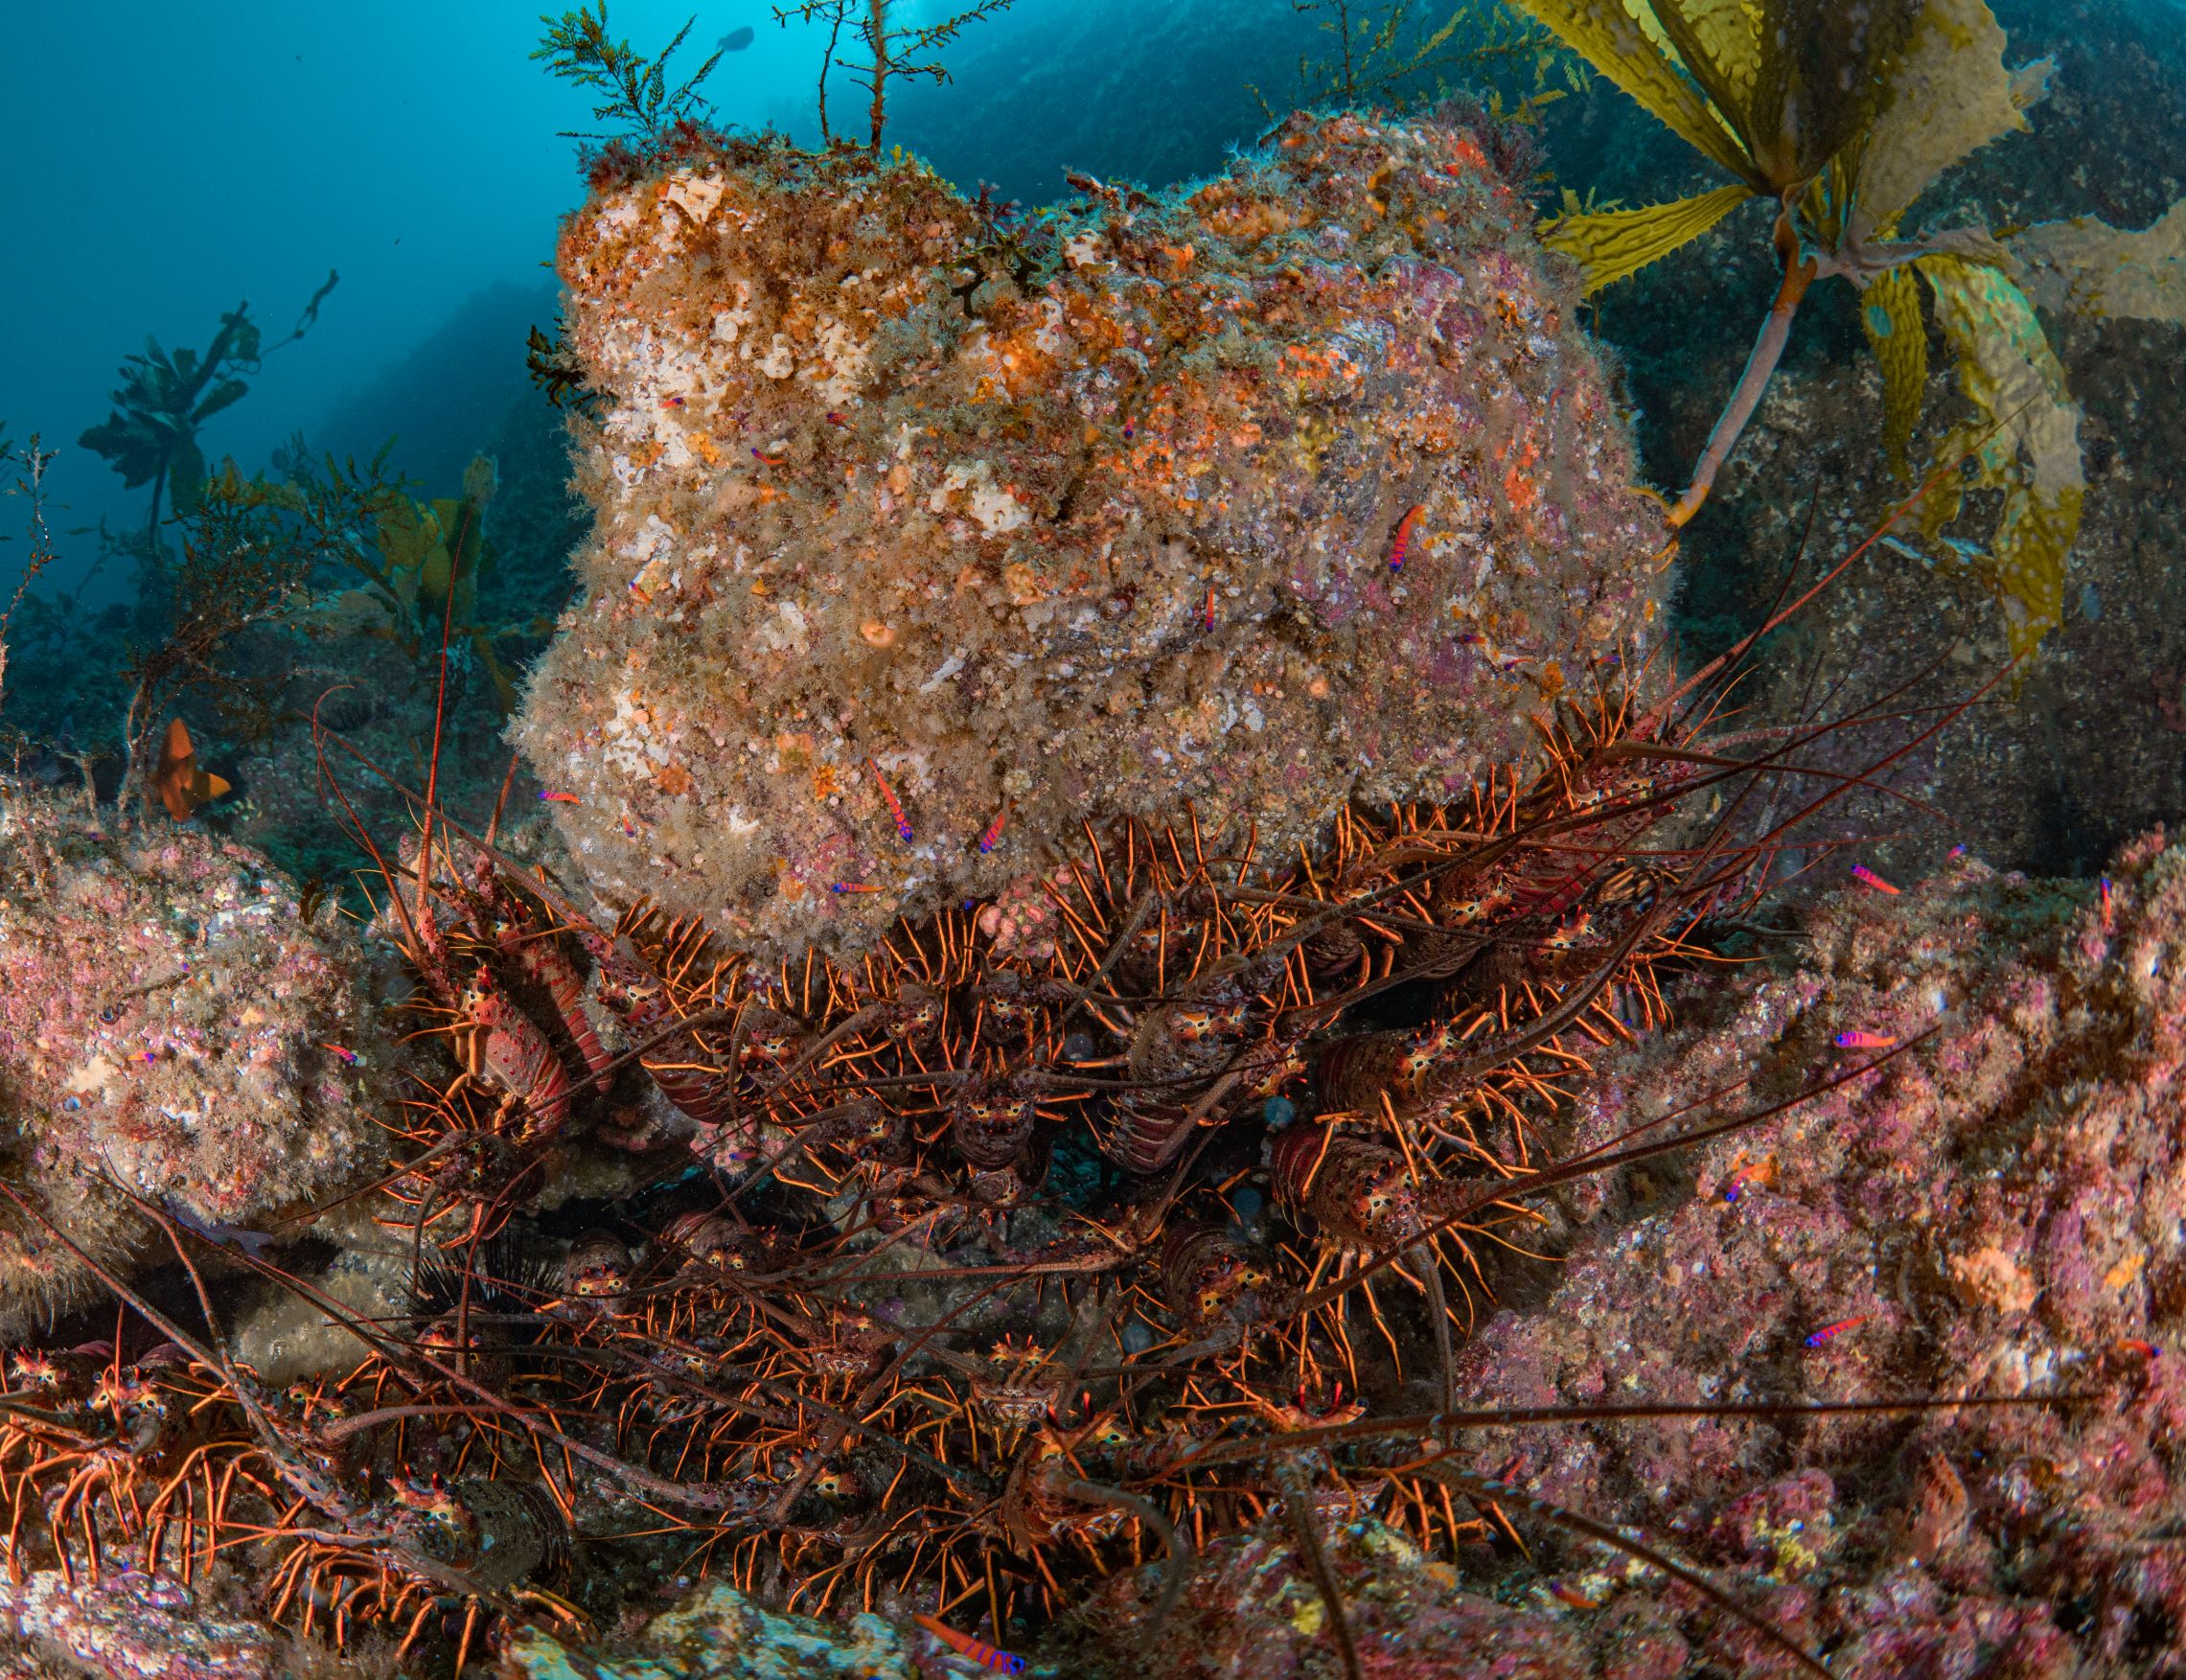 California spiny lobster in water